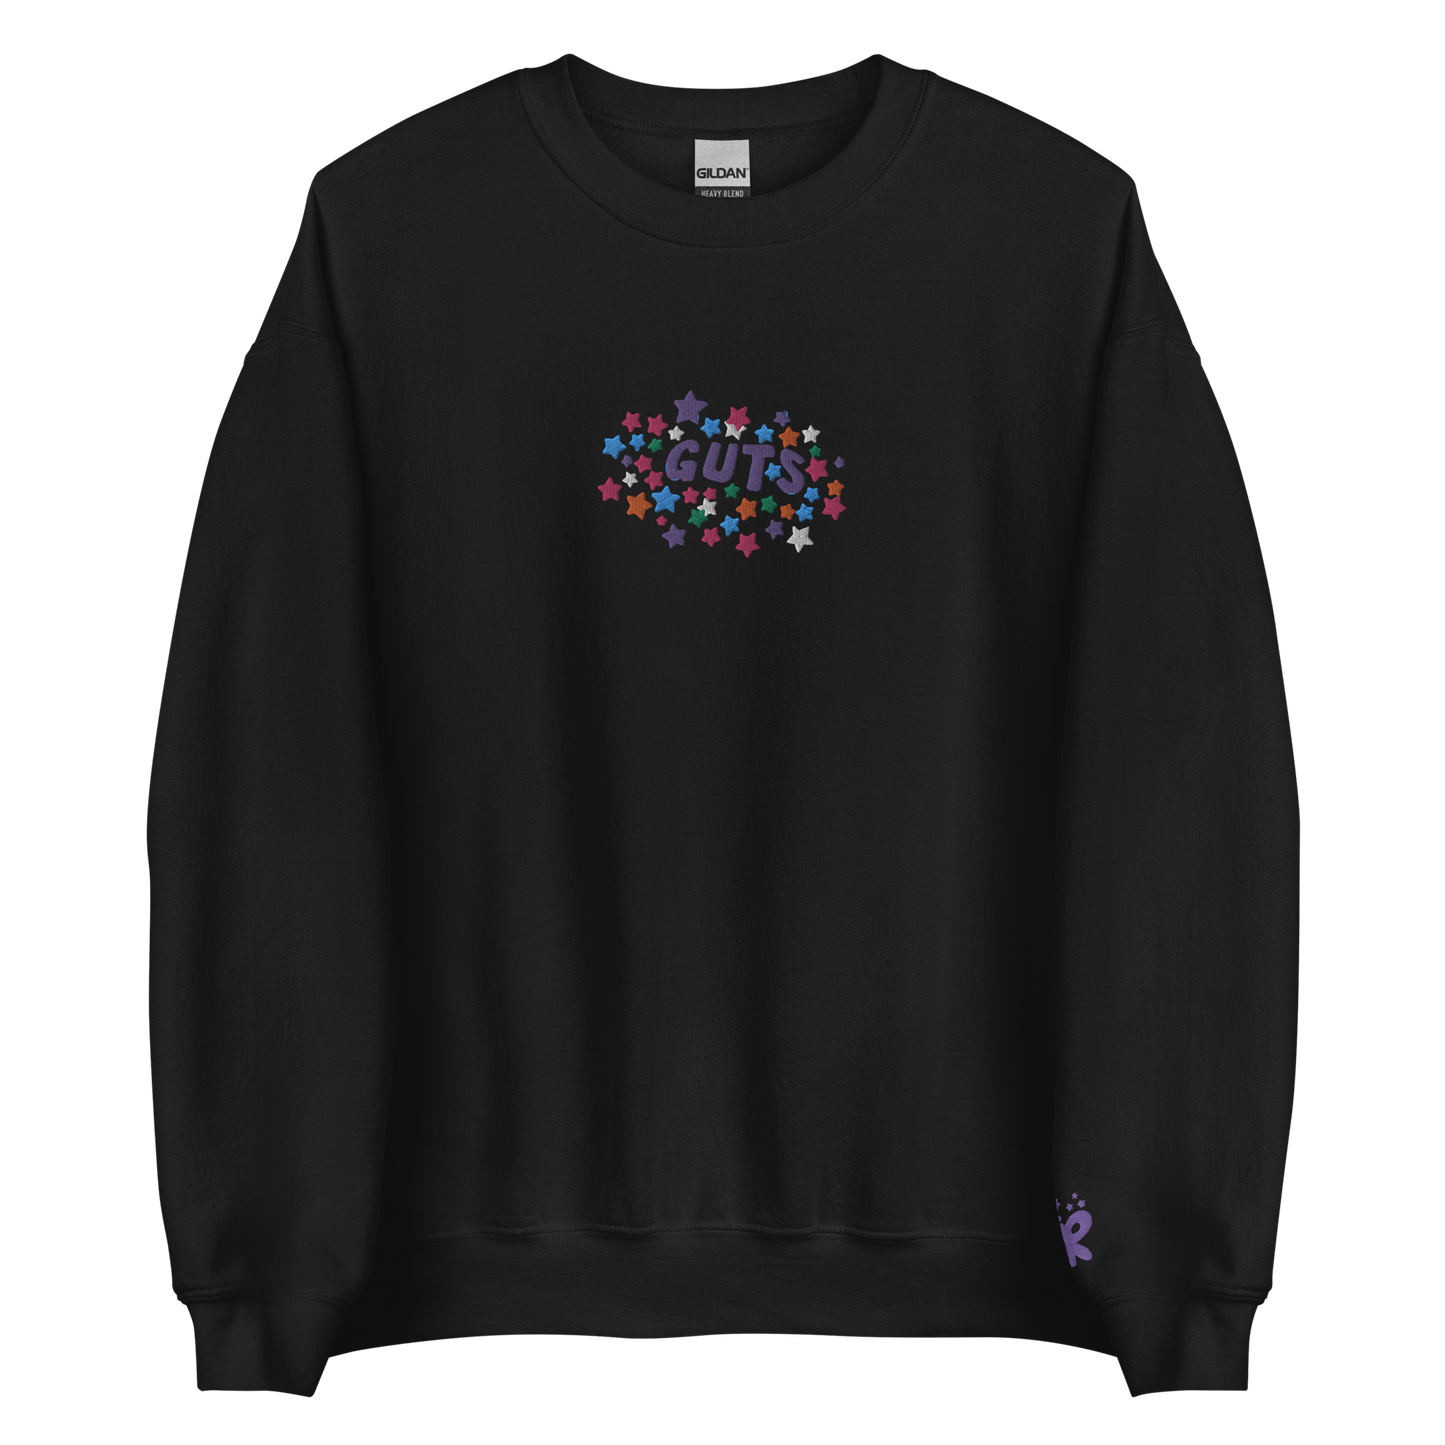 GUTS - Embroidered Crew Neck